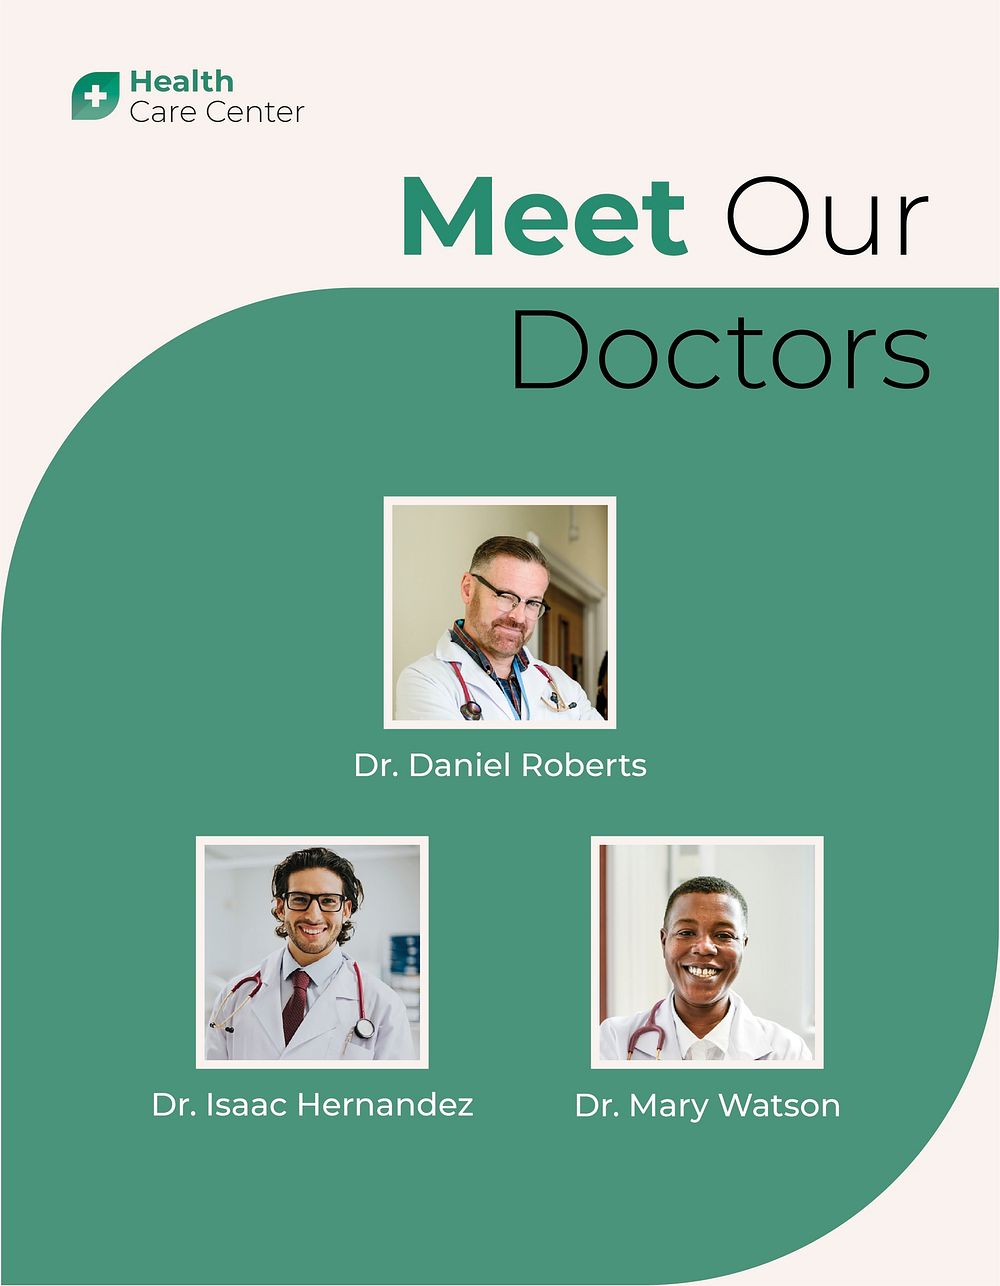 Meet our doctors flyer template, healthcare services vector